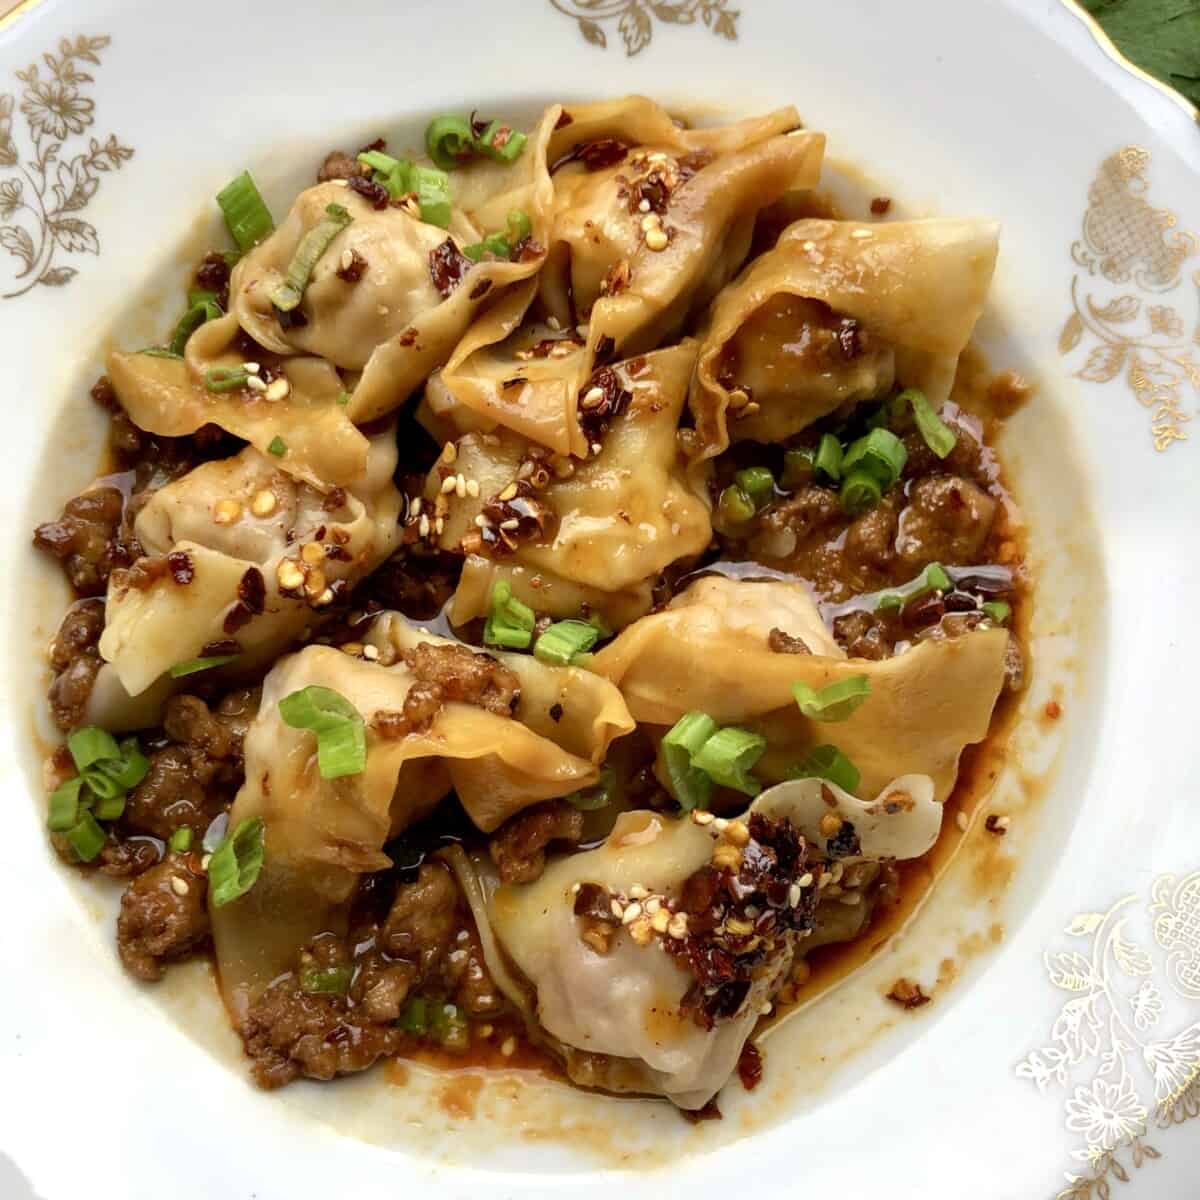 Homemade Sichuan wontons with spicy homemade chili sauce, crispy pork, and scallions in a bowl